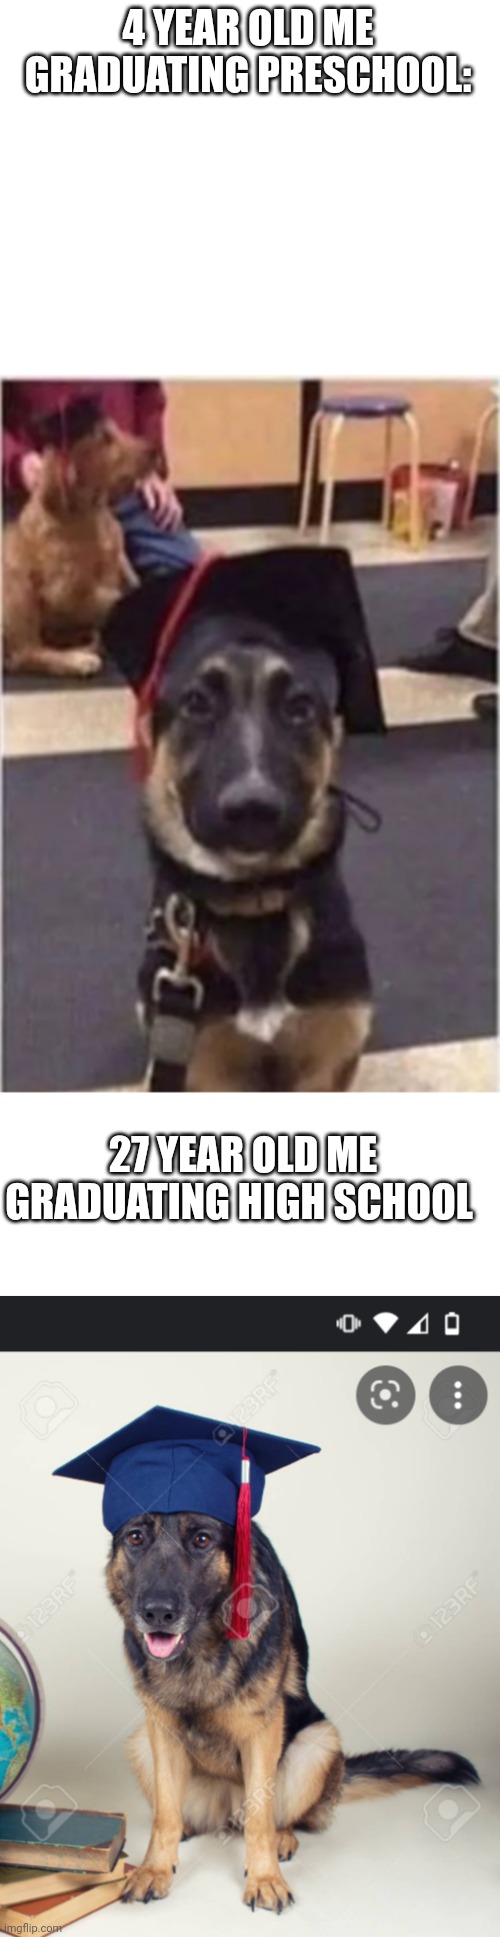 I no brain person |  4 YEAR OLD ME GRADUATING PRESCHOOL:; 27 YEAR OLD ME GRADUATING HIGH SCHOOL | image tagged in blank white template,school | made w/ Imgflip meme maker